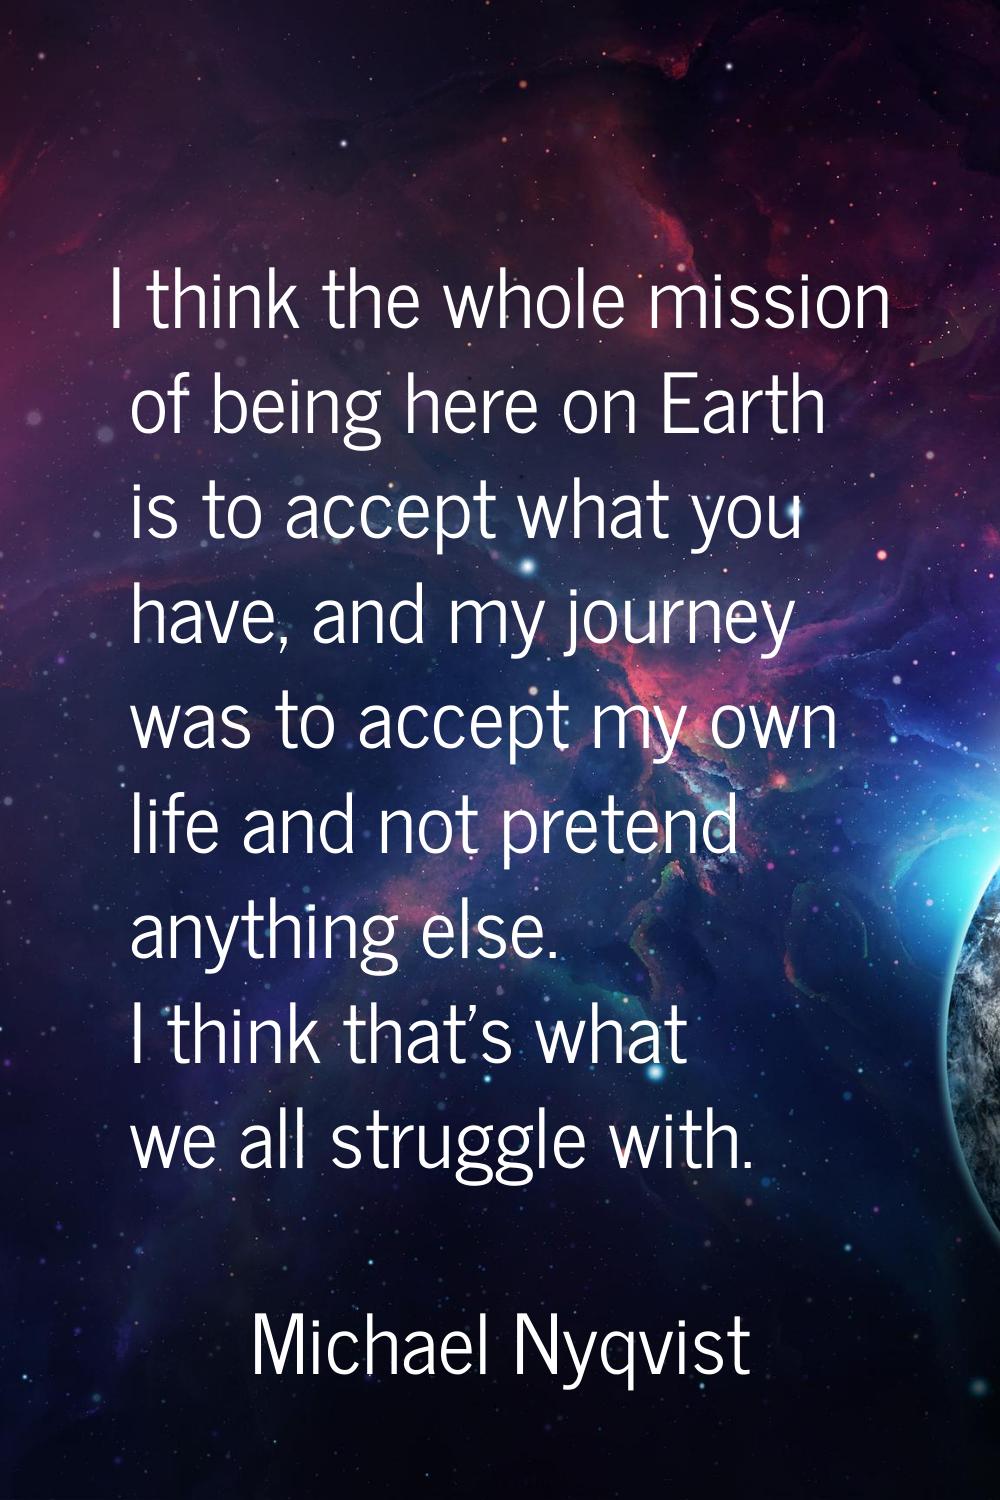 I think the whole mission of being here on Earth is to accept what you have, and my journey was to 